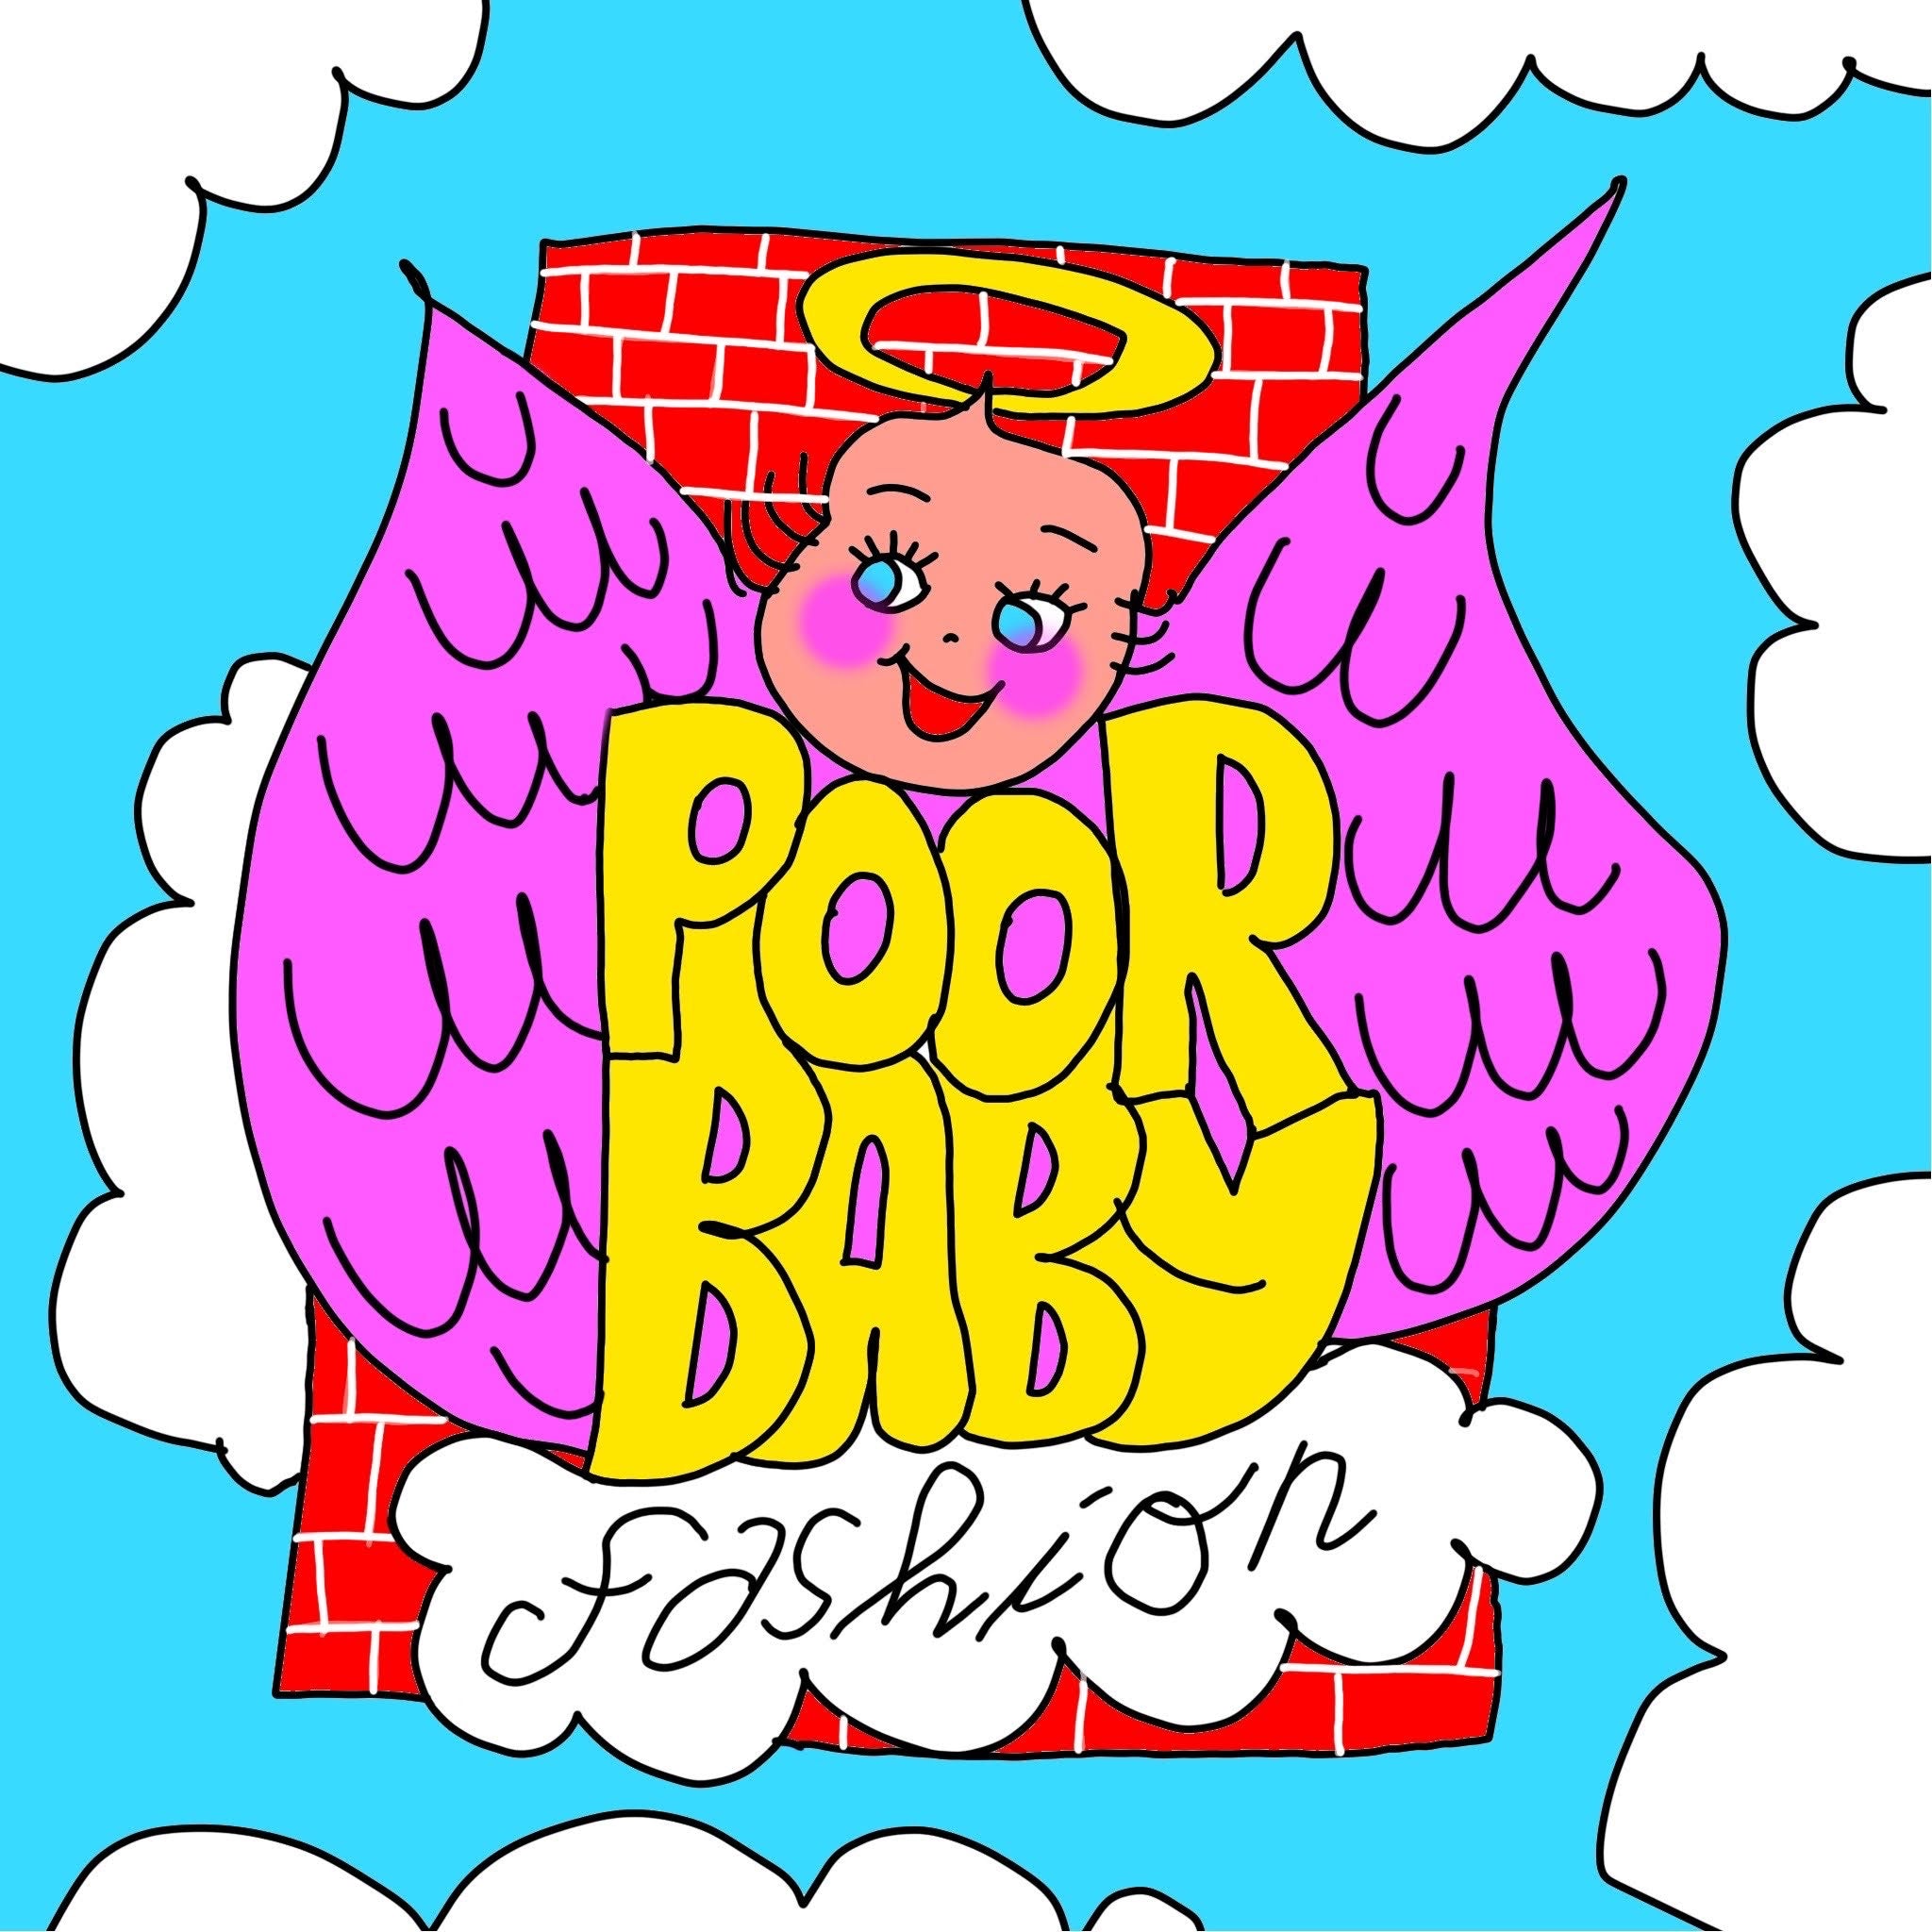 poorbaby fashion gift card